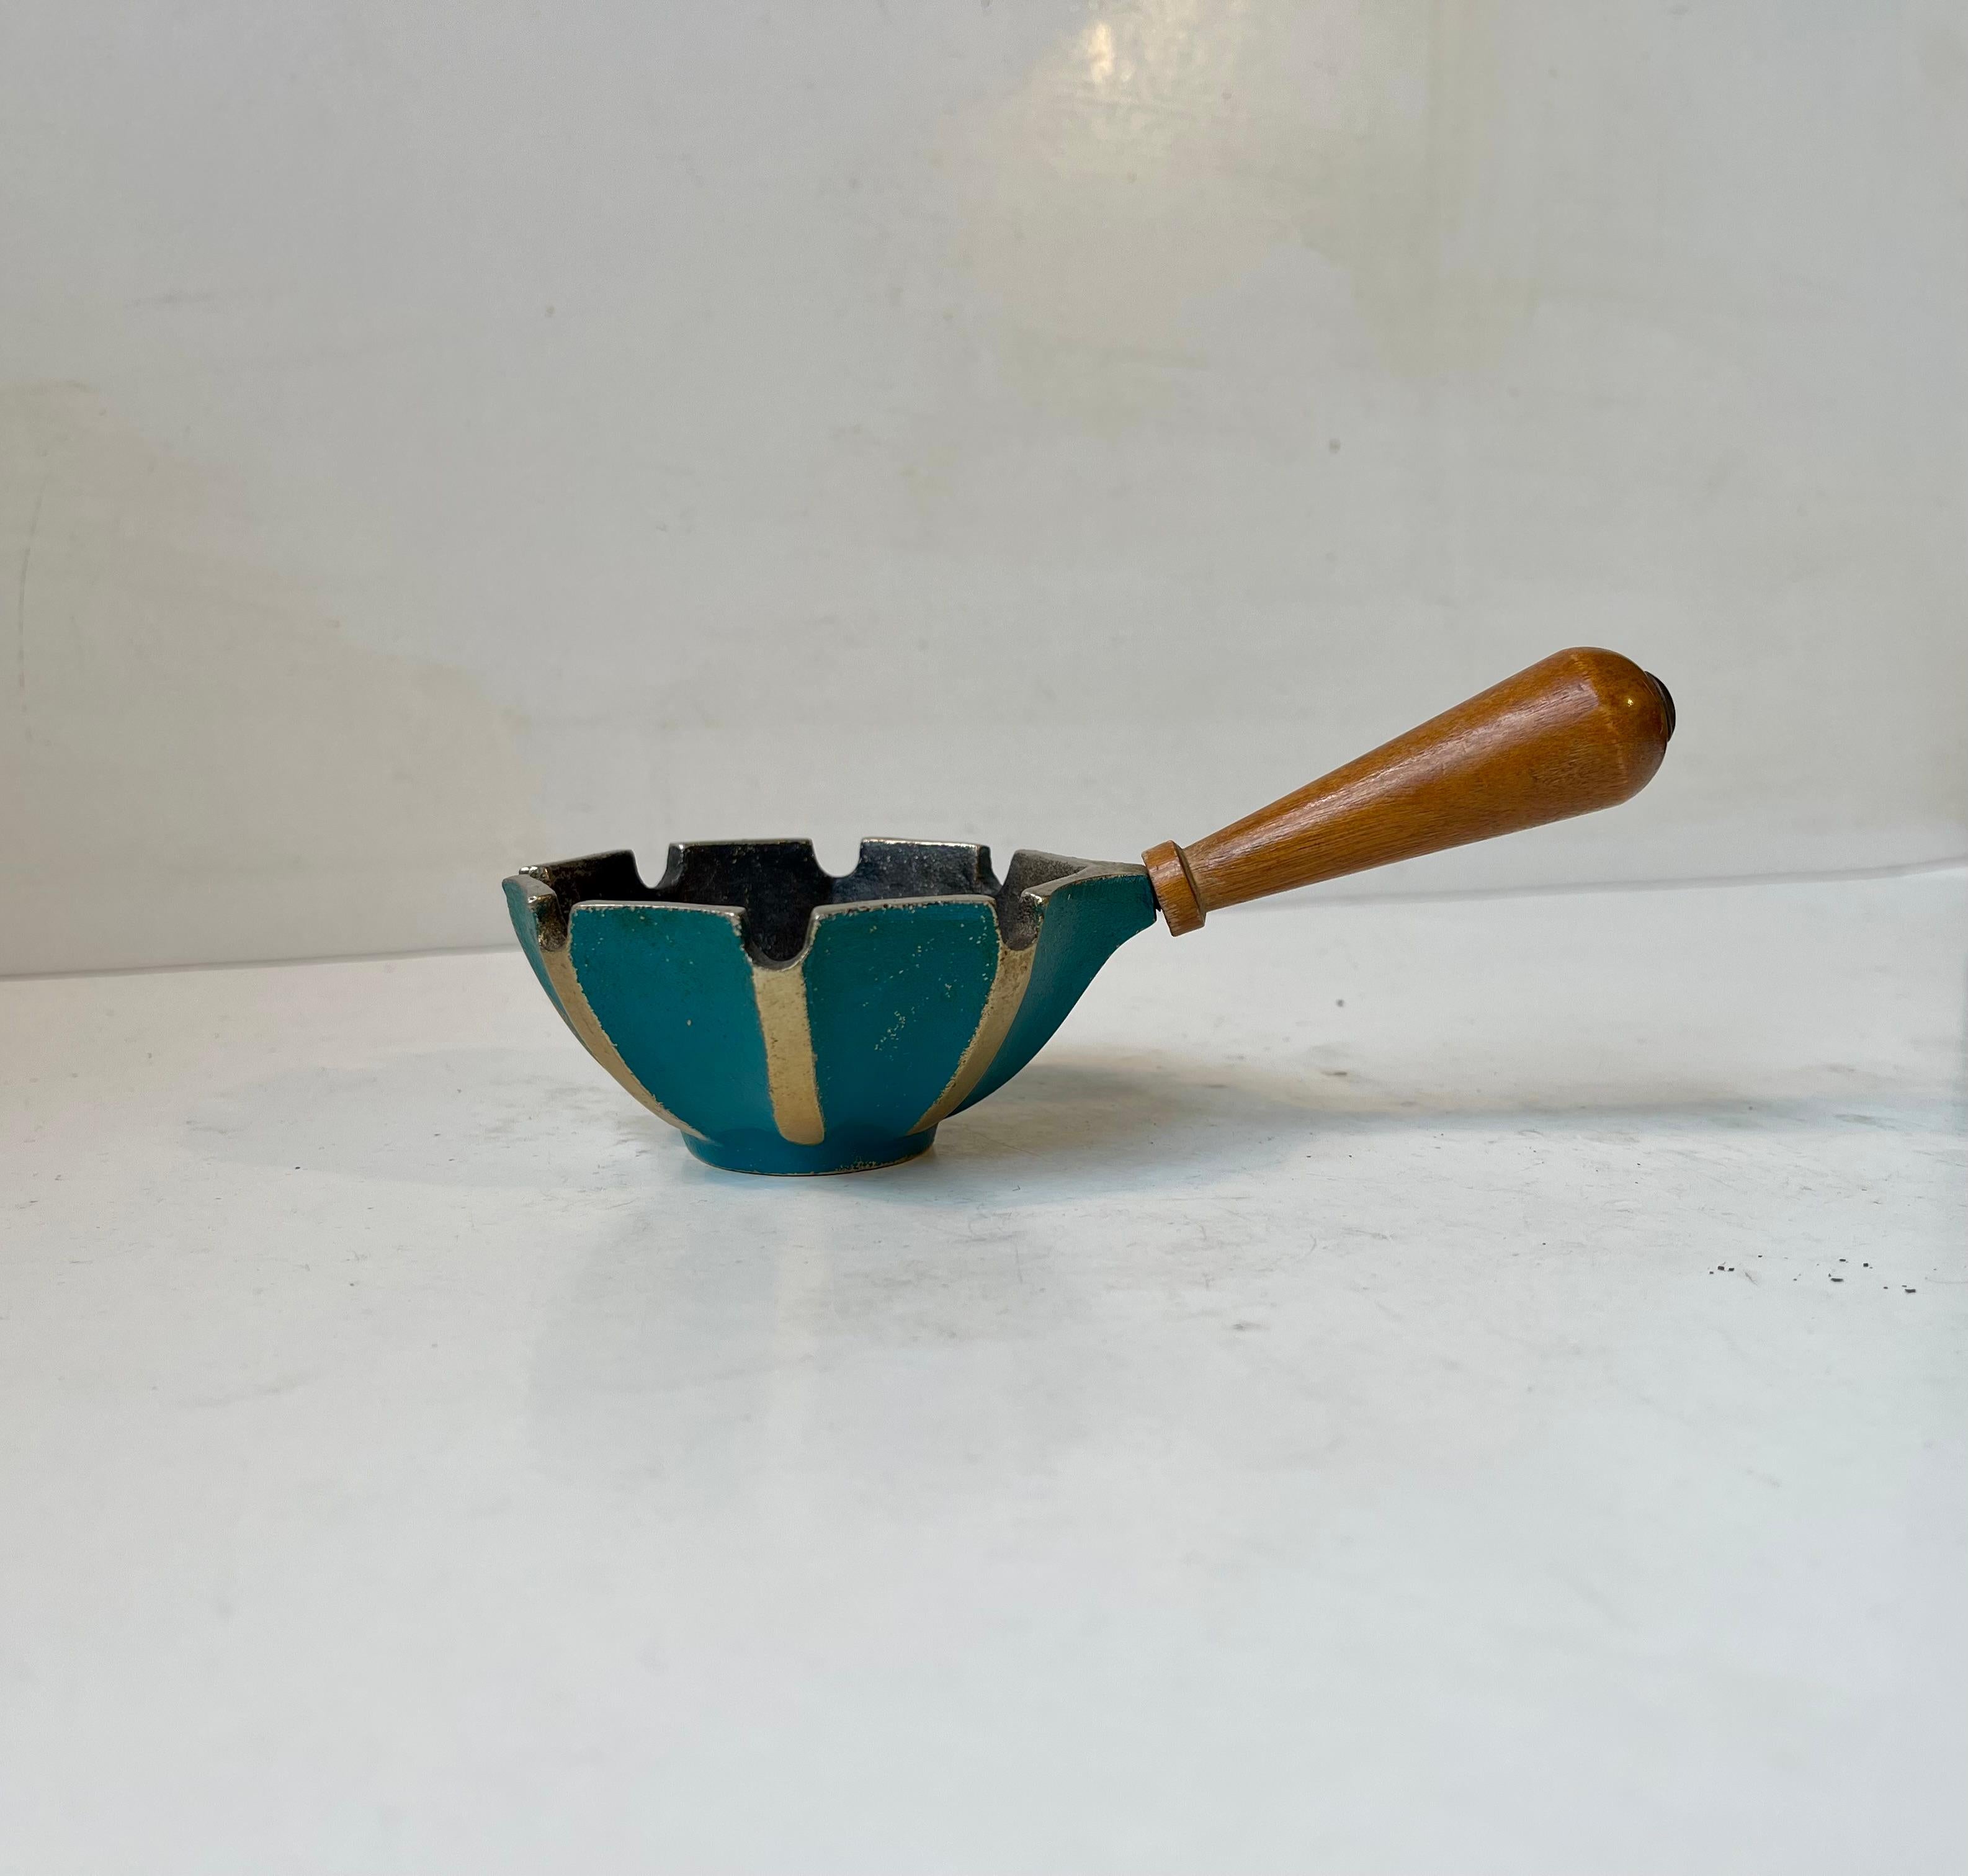 A practical ashtray with handle. Its made from beech and fluted cast iron partially decorated with teal green paint. Made in Israel circa 1960-70. Measurements: W: 15/8 cm, H: 4 cm (tray). Go green with personal sustainable presents.

Free World